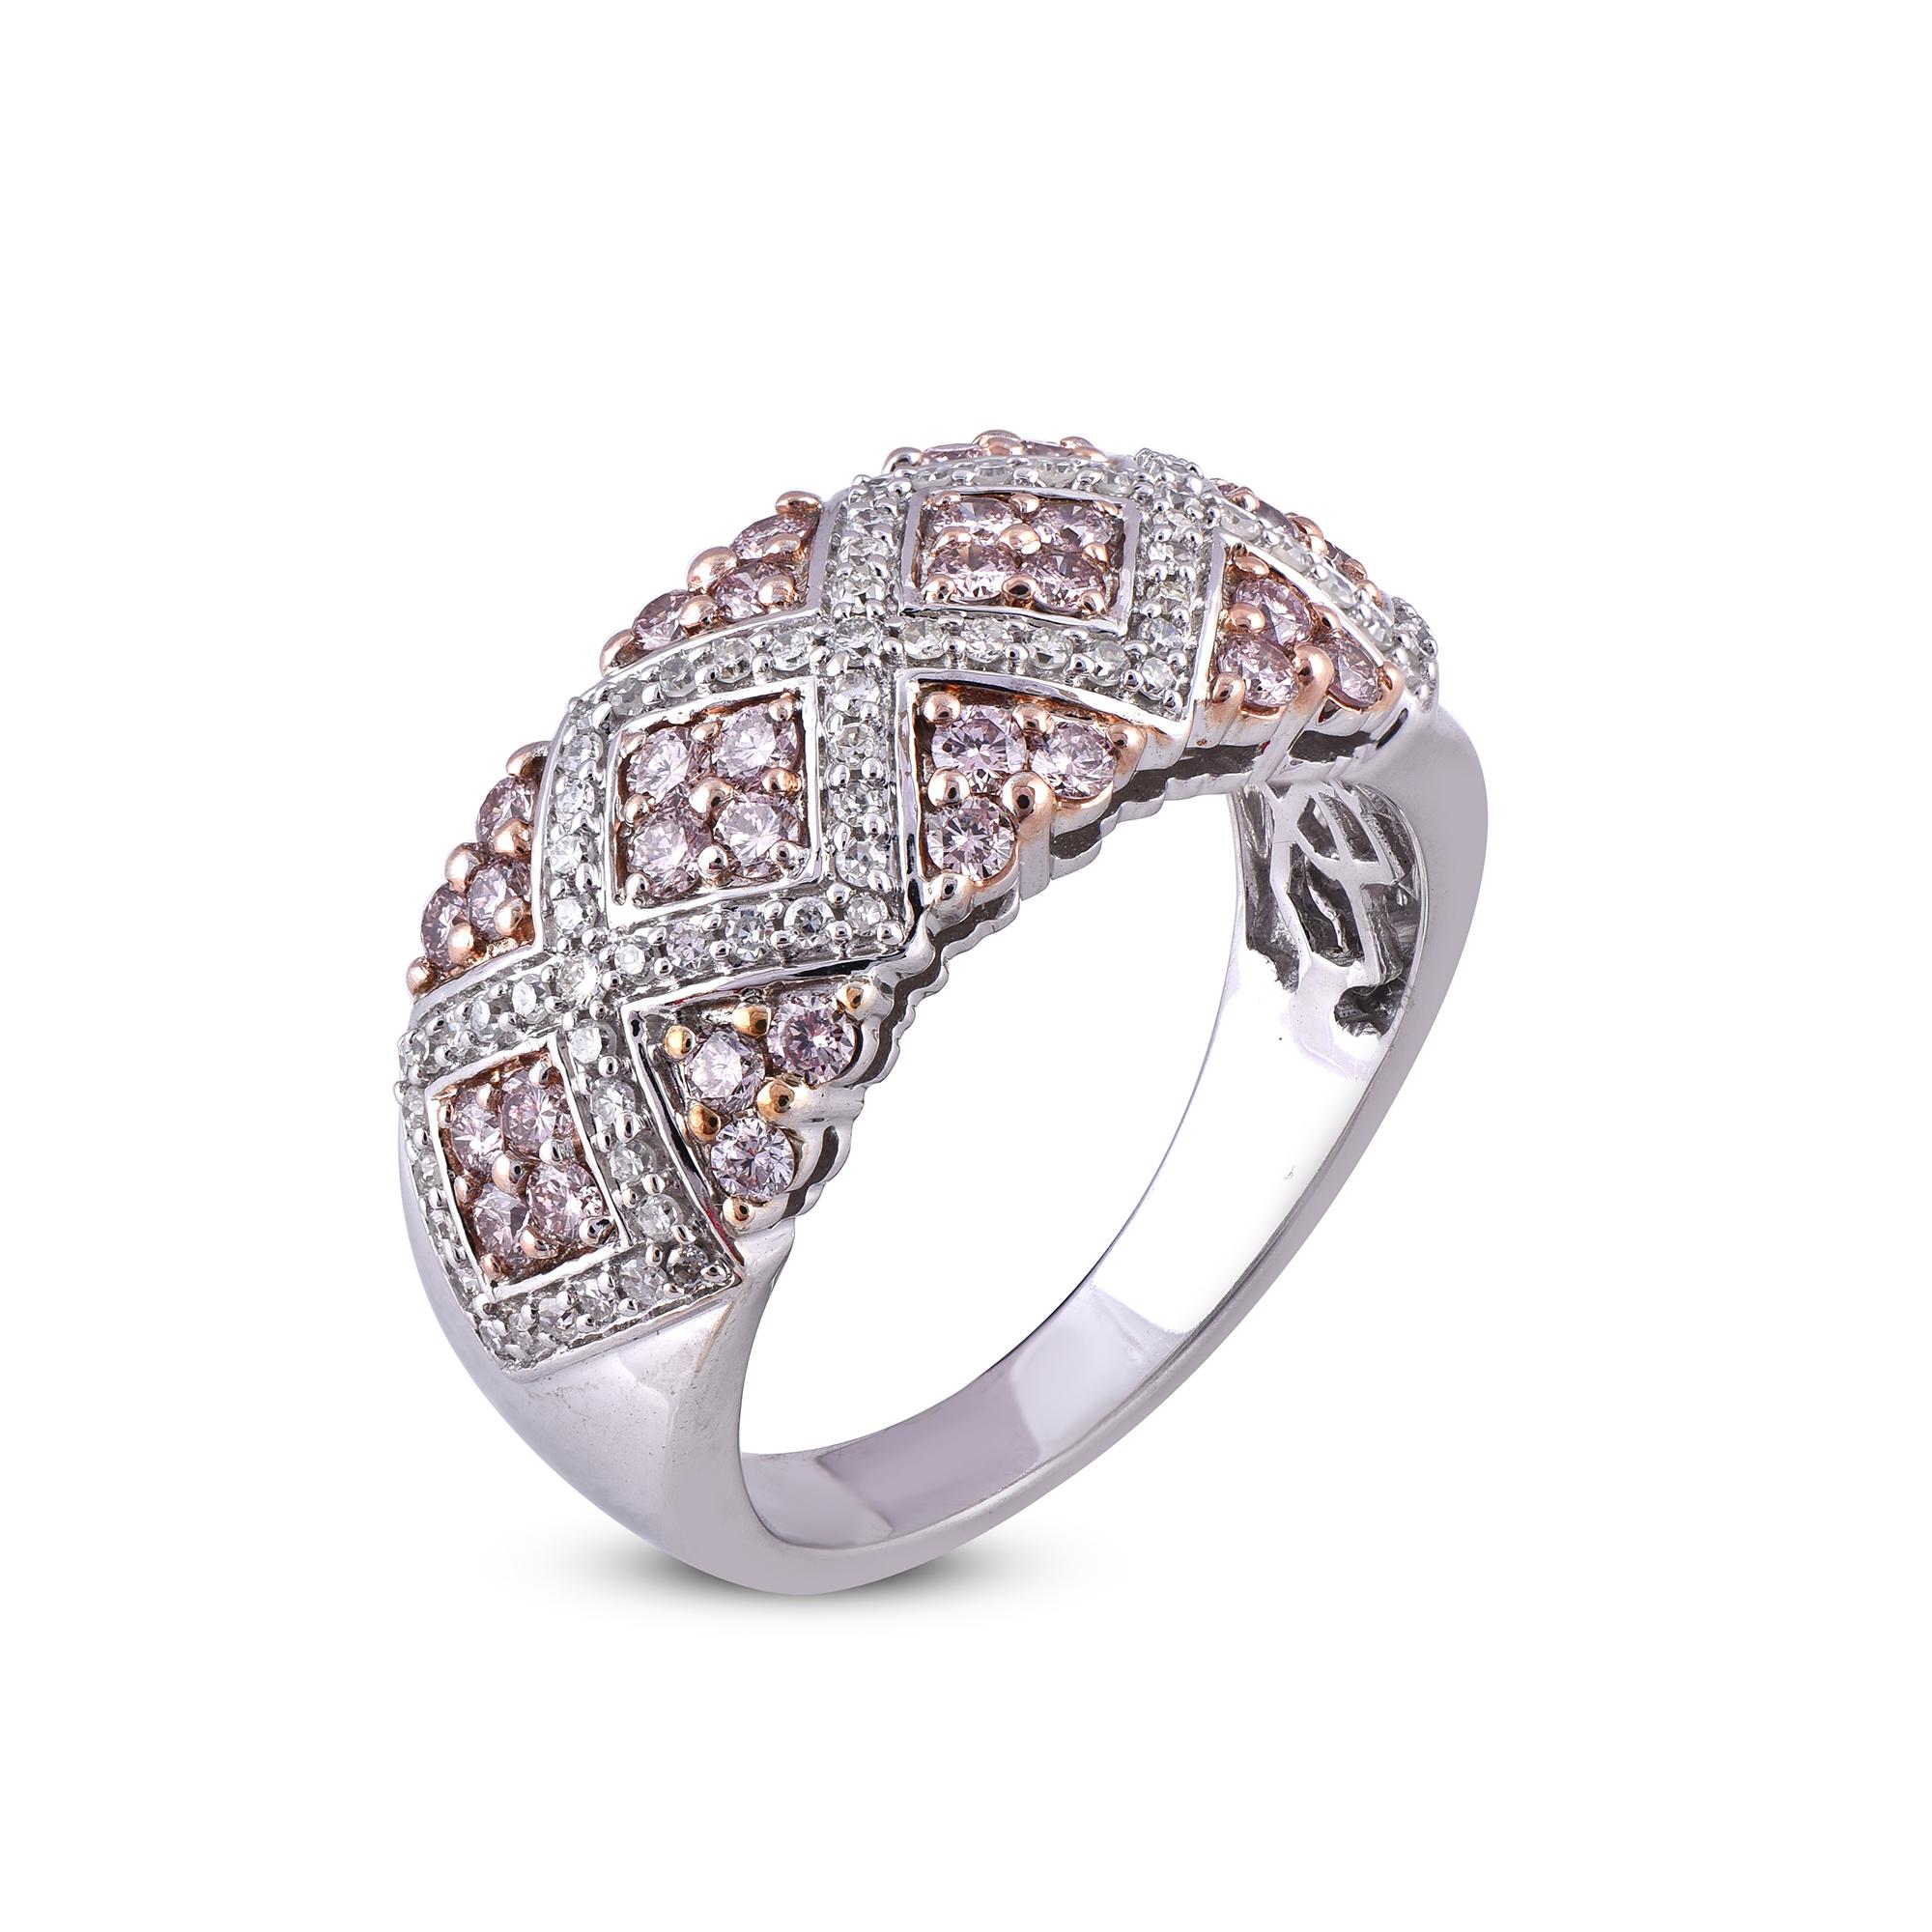 Beautifully crafted in 18K white gold crossover wedding band ring featuring wave design and jeweled with white and pink diamonds. This ring is superbly detailed to perfection and set with 1.00 carat of sparkling 77 round and 34 pink diamonds in